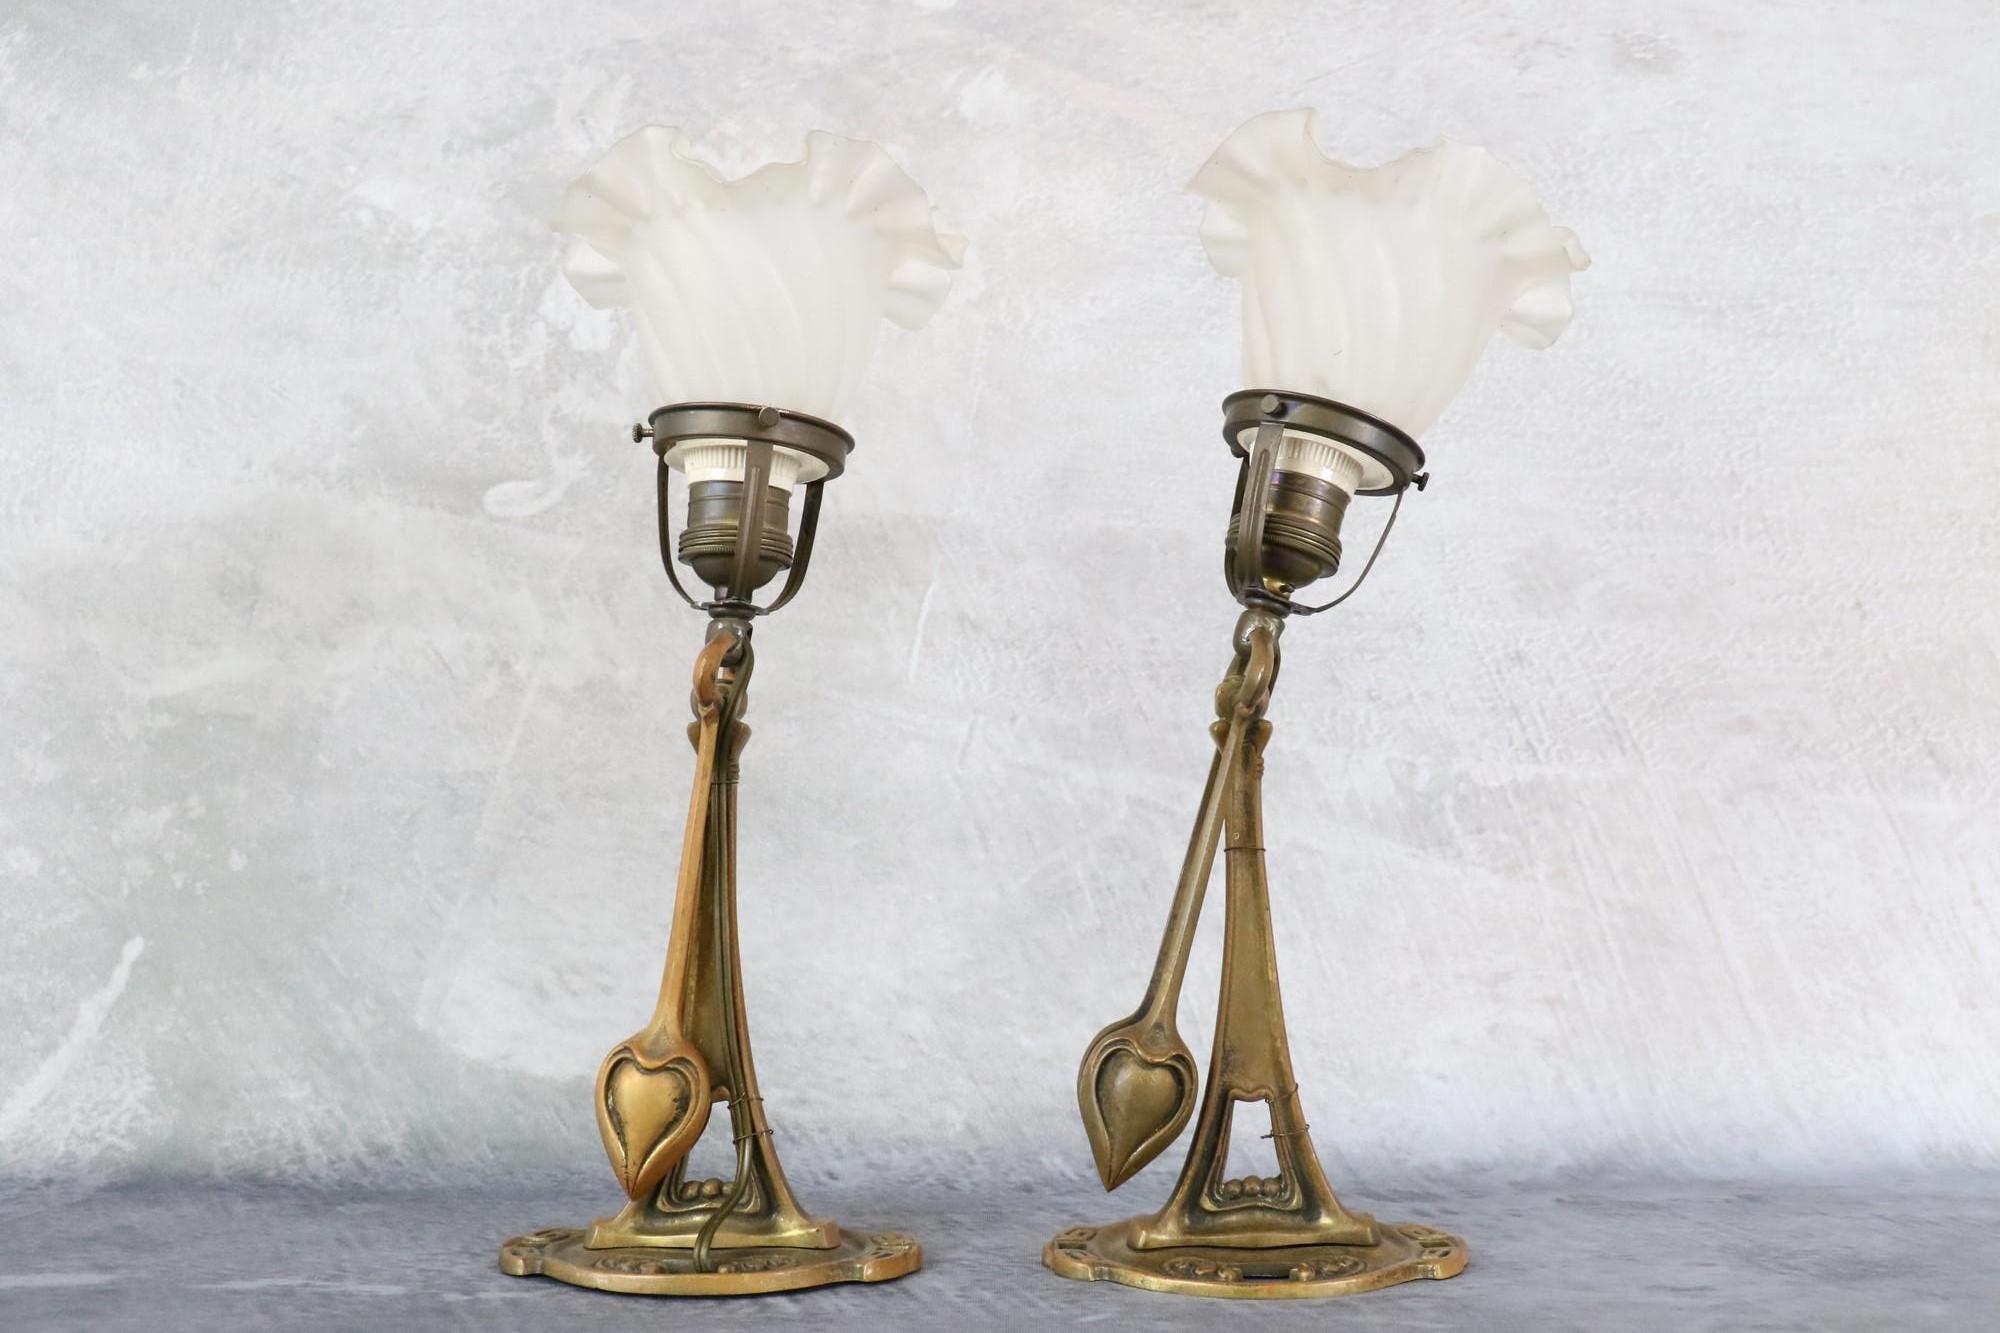 French Pair of Art Nouveau Wall Lamps in the style of Hector Guimard France